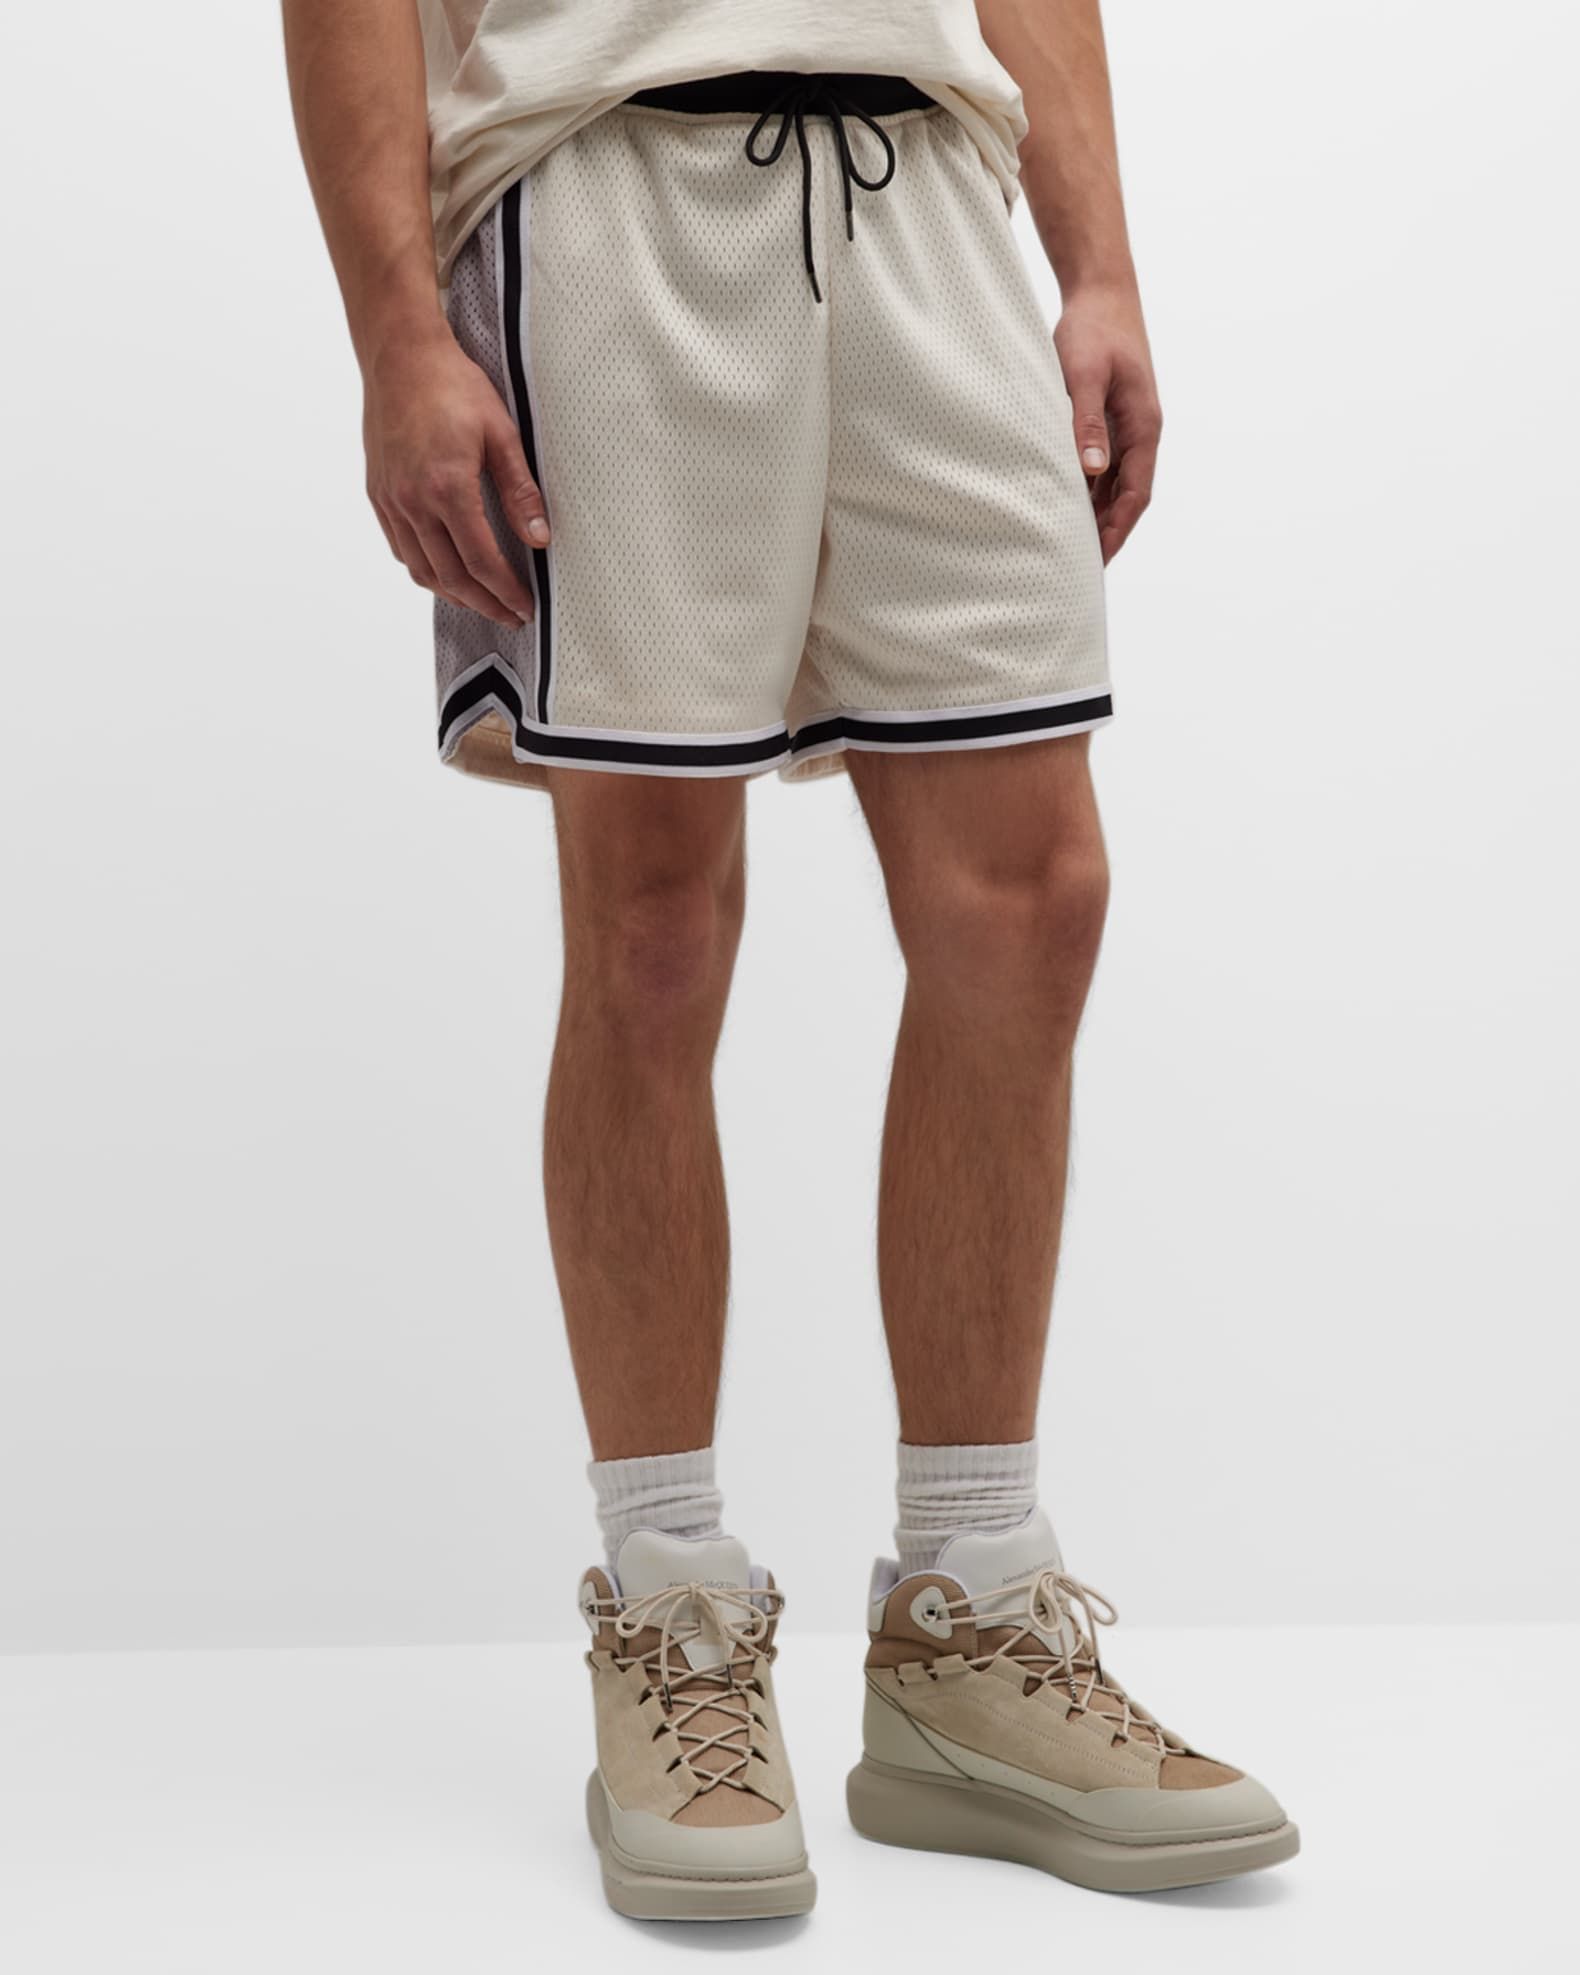 The 15 Best Basketball Shorts to Ball in Style in 2023